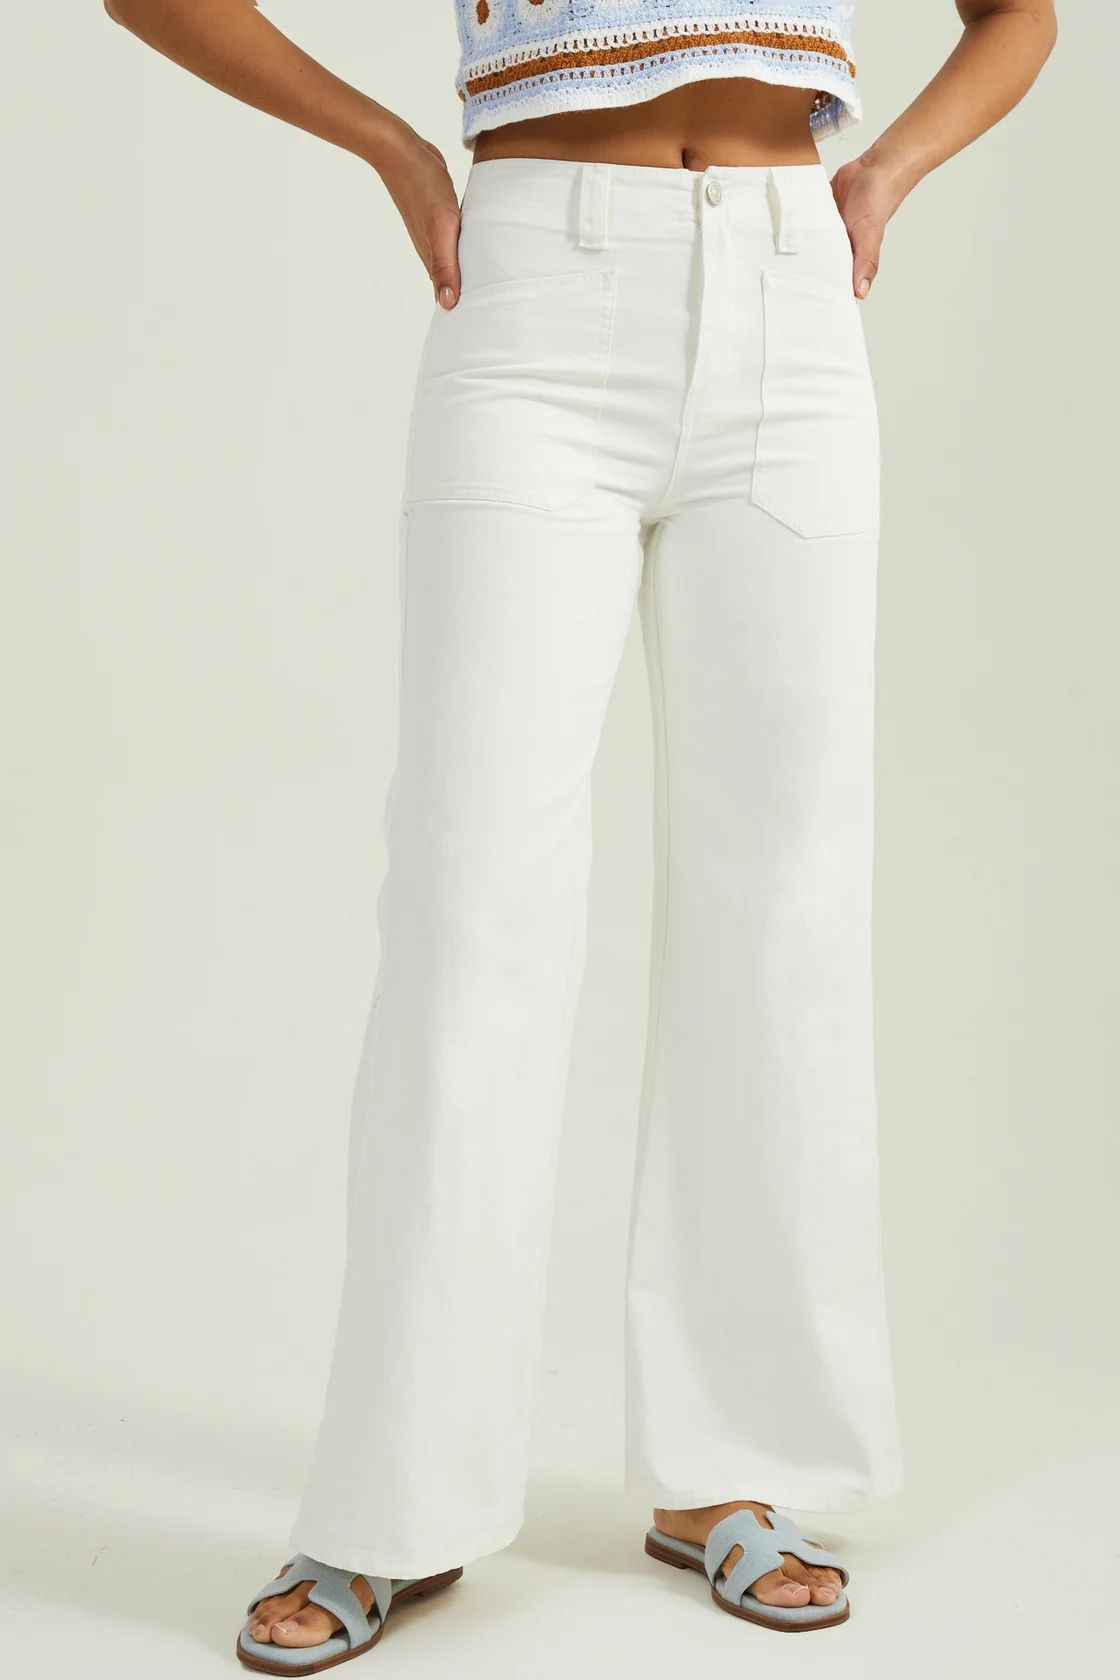 Juno Wide Straight Leg Pants in White | Altar'd State | Altar'd State